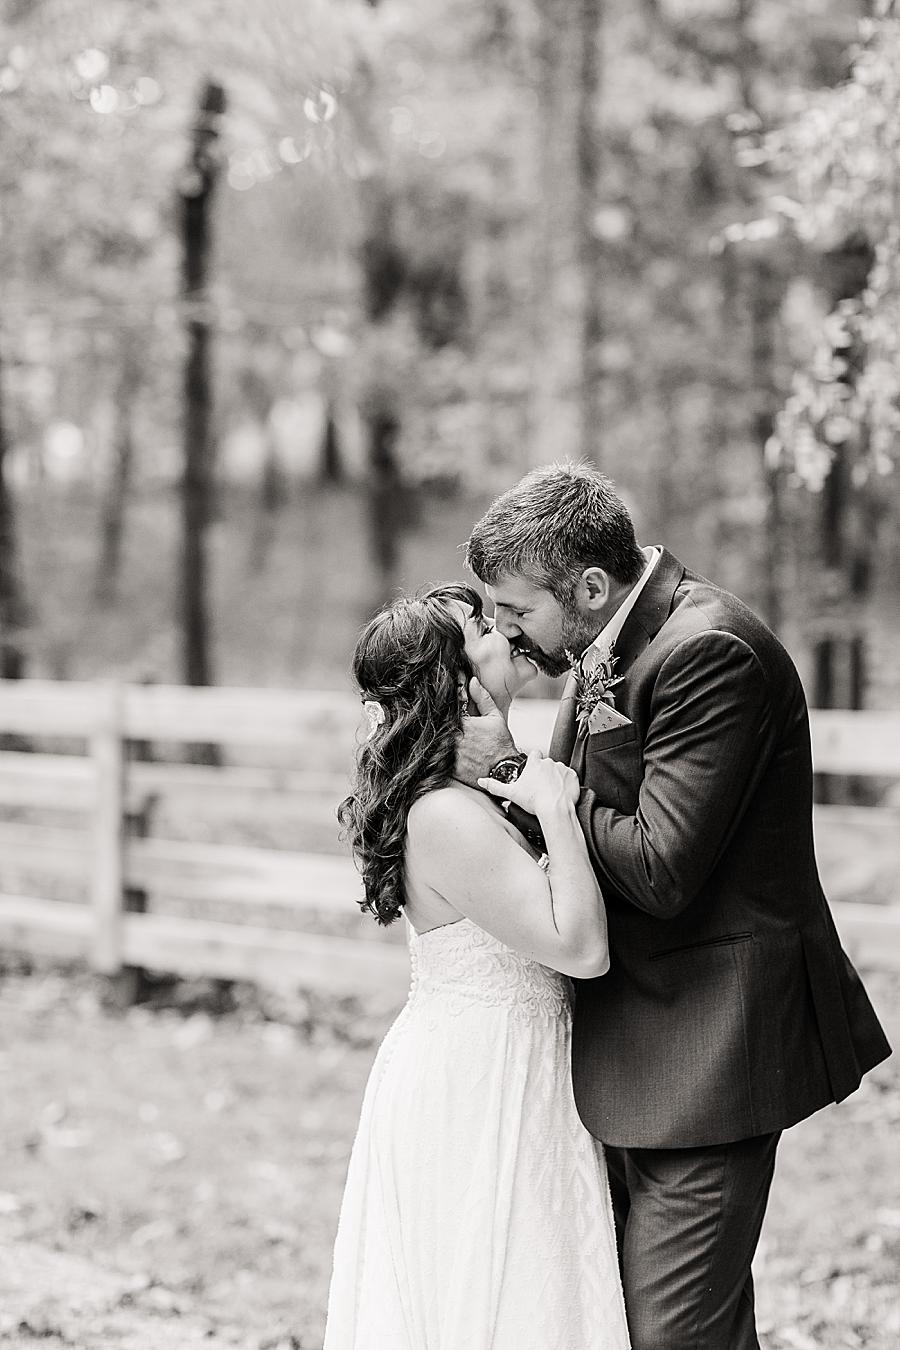 Almost kissing at this RiverView Family Farm wedding by Knoxville Wedding Photographer, Amanda May Photos.